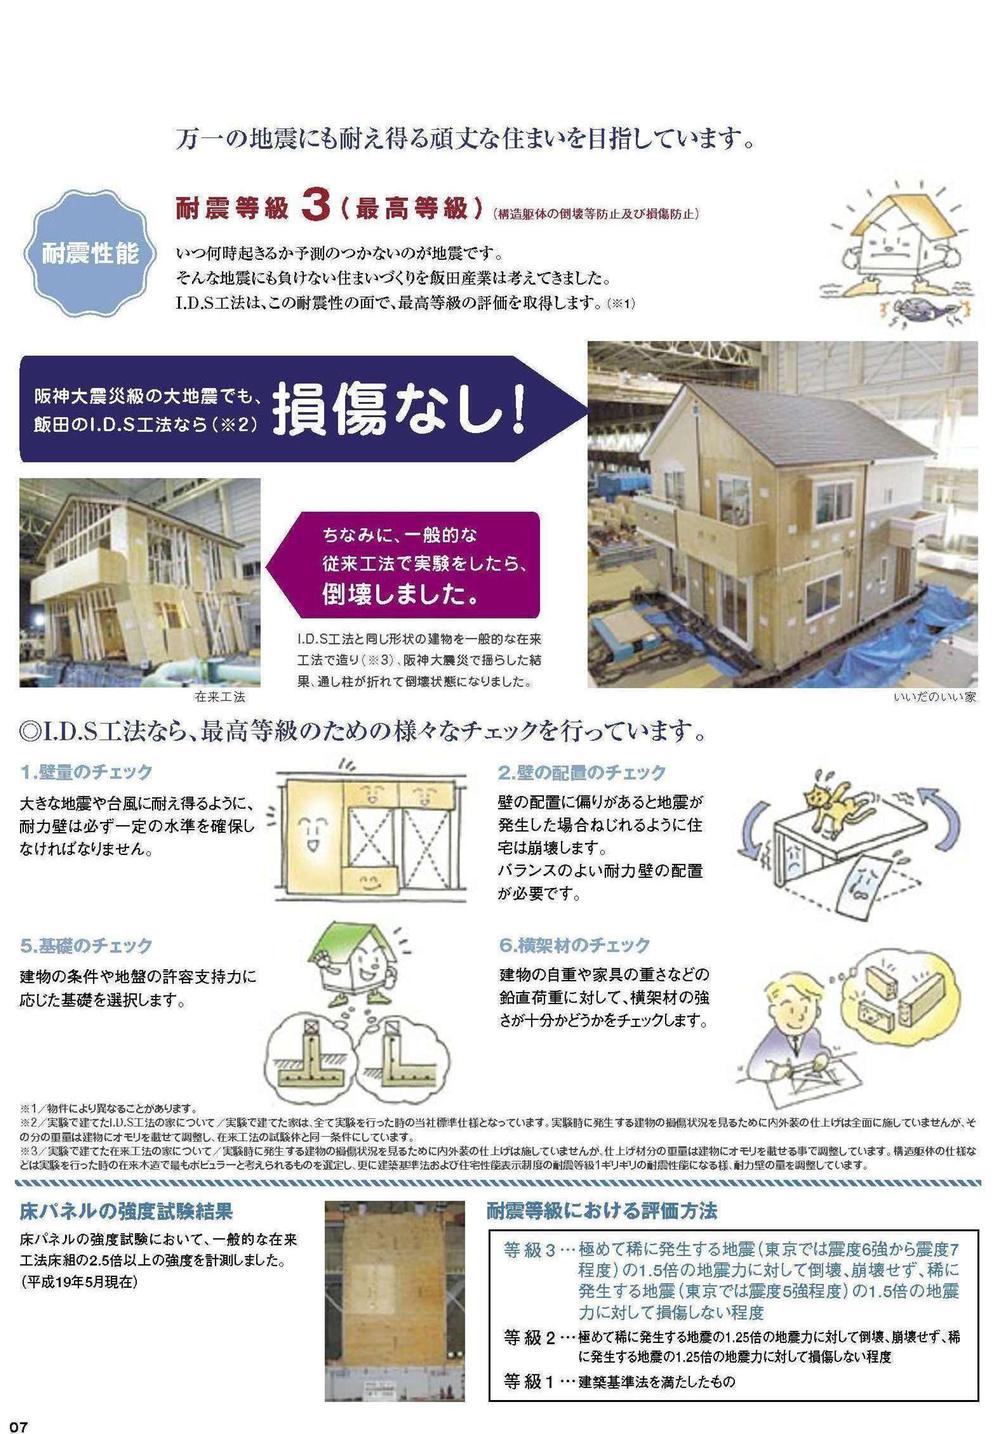 Construction ・ Construction method ・ specification. When is the earthquake that unpredictable what happens at. The residence building that does not lose to such earthquake Idasangyo have been thinking. 